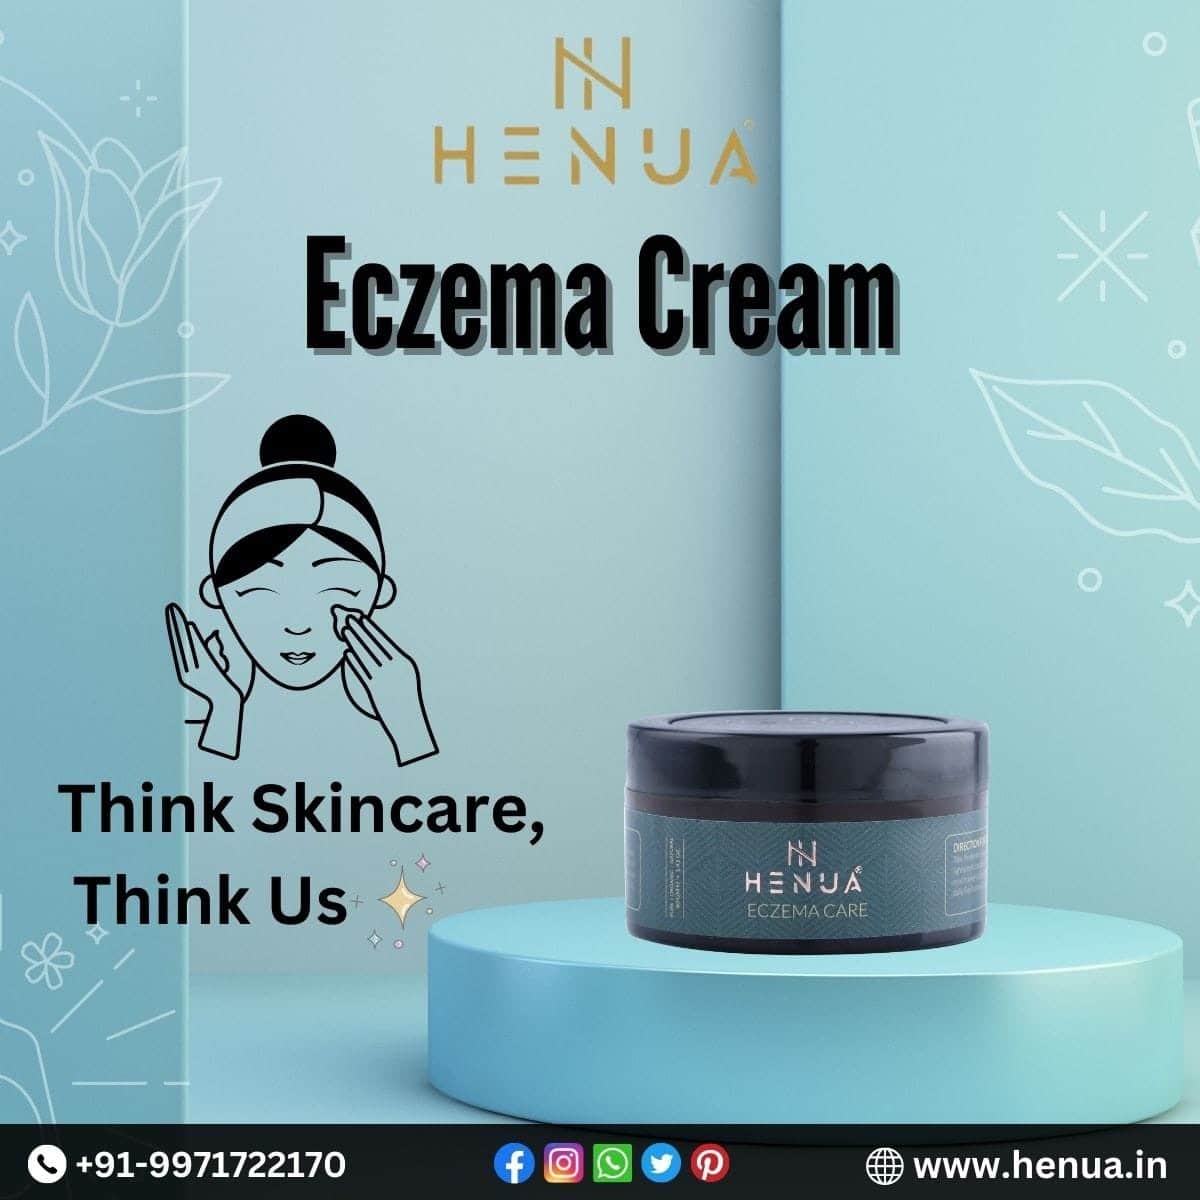 Get-Relief-From-Dryness-Of-The-Skin-With-Henua-Eczema-Cream